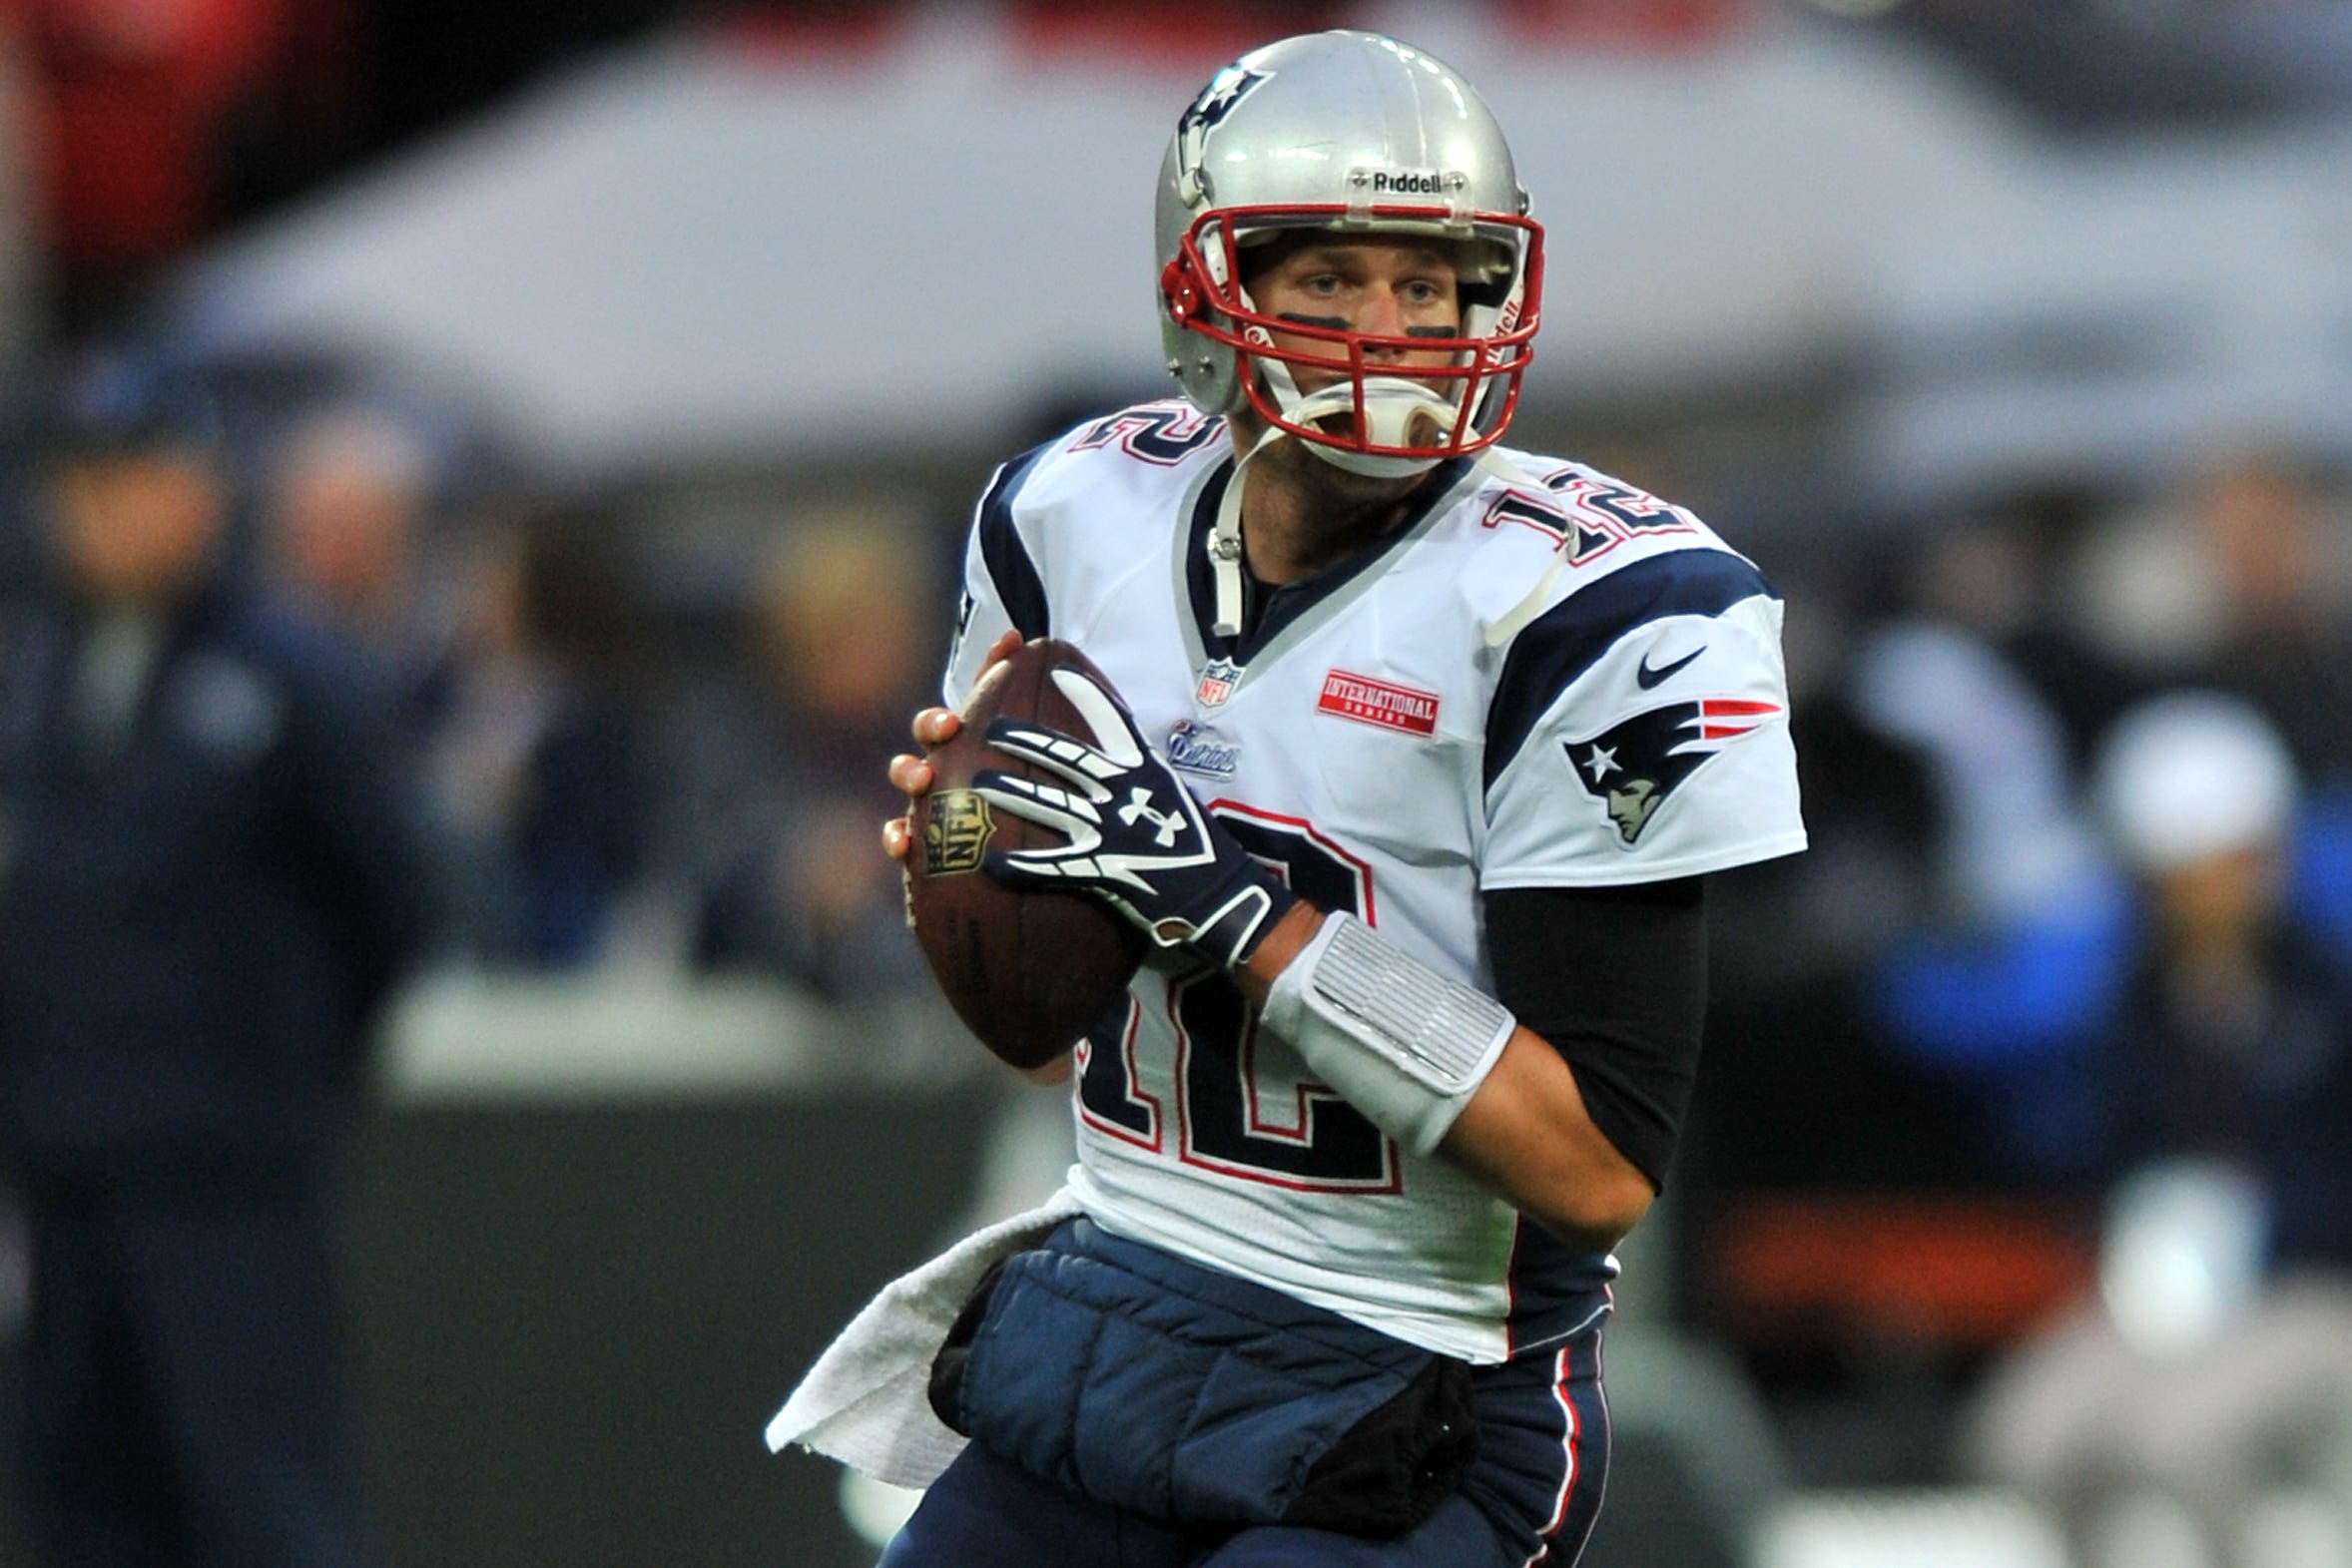 Retiring quarterback Tom Brady's glittering career in numbers, rings and  records